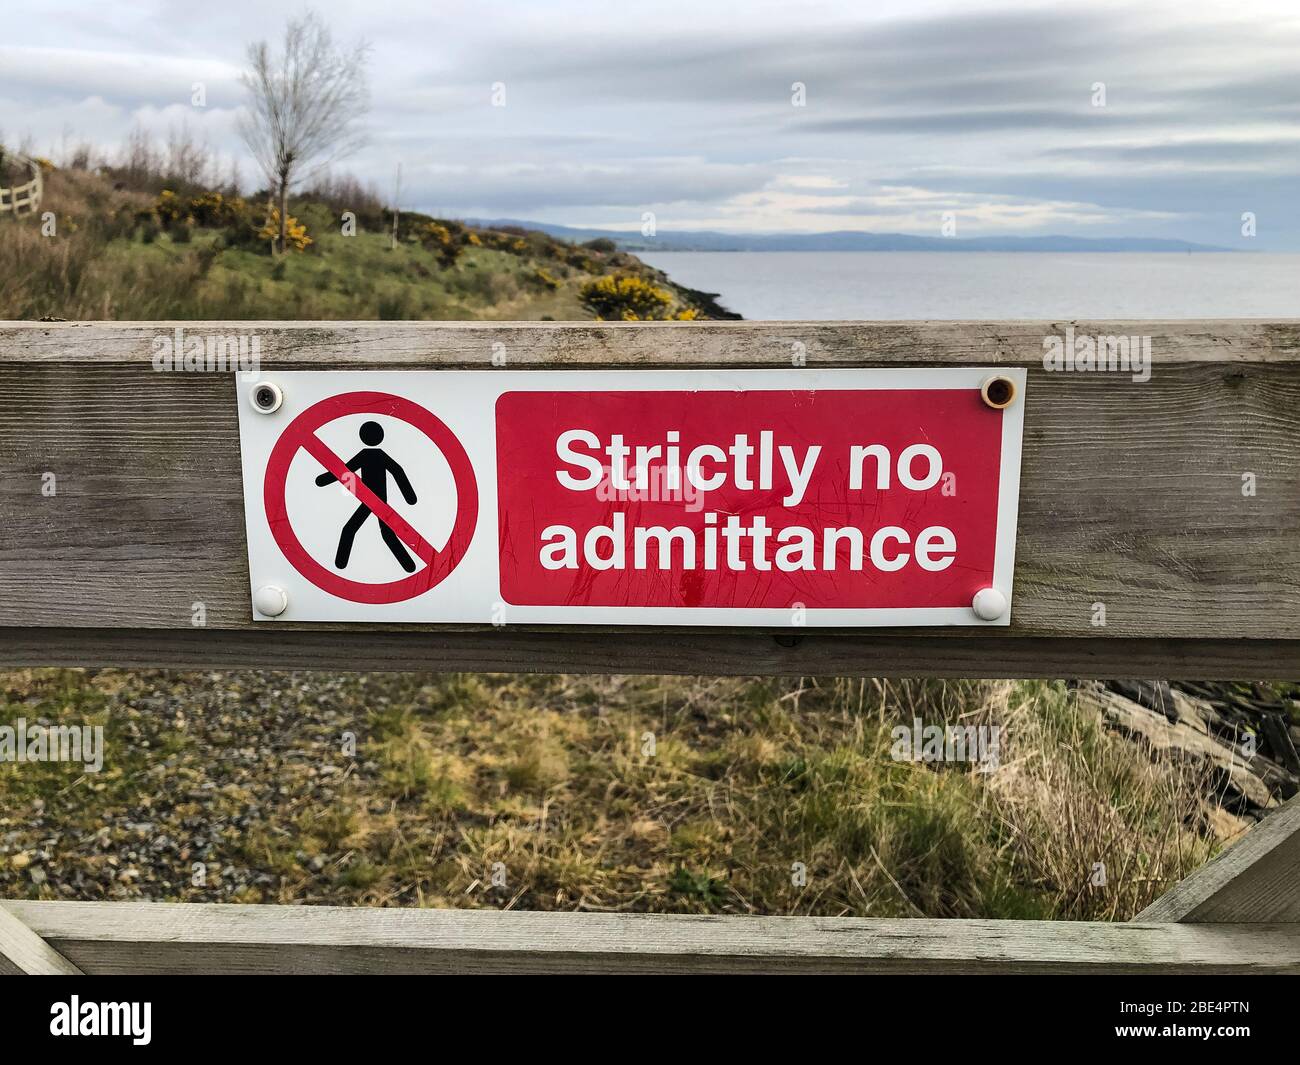 Derry, UK - April 4, 2020: No Admittance sign in a public park in the UK Stock Photo